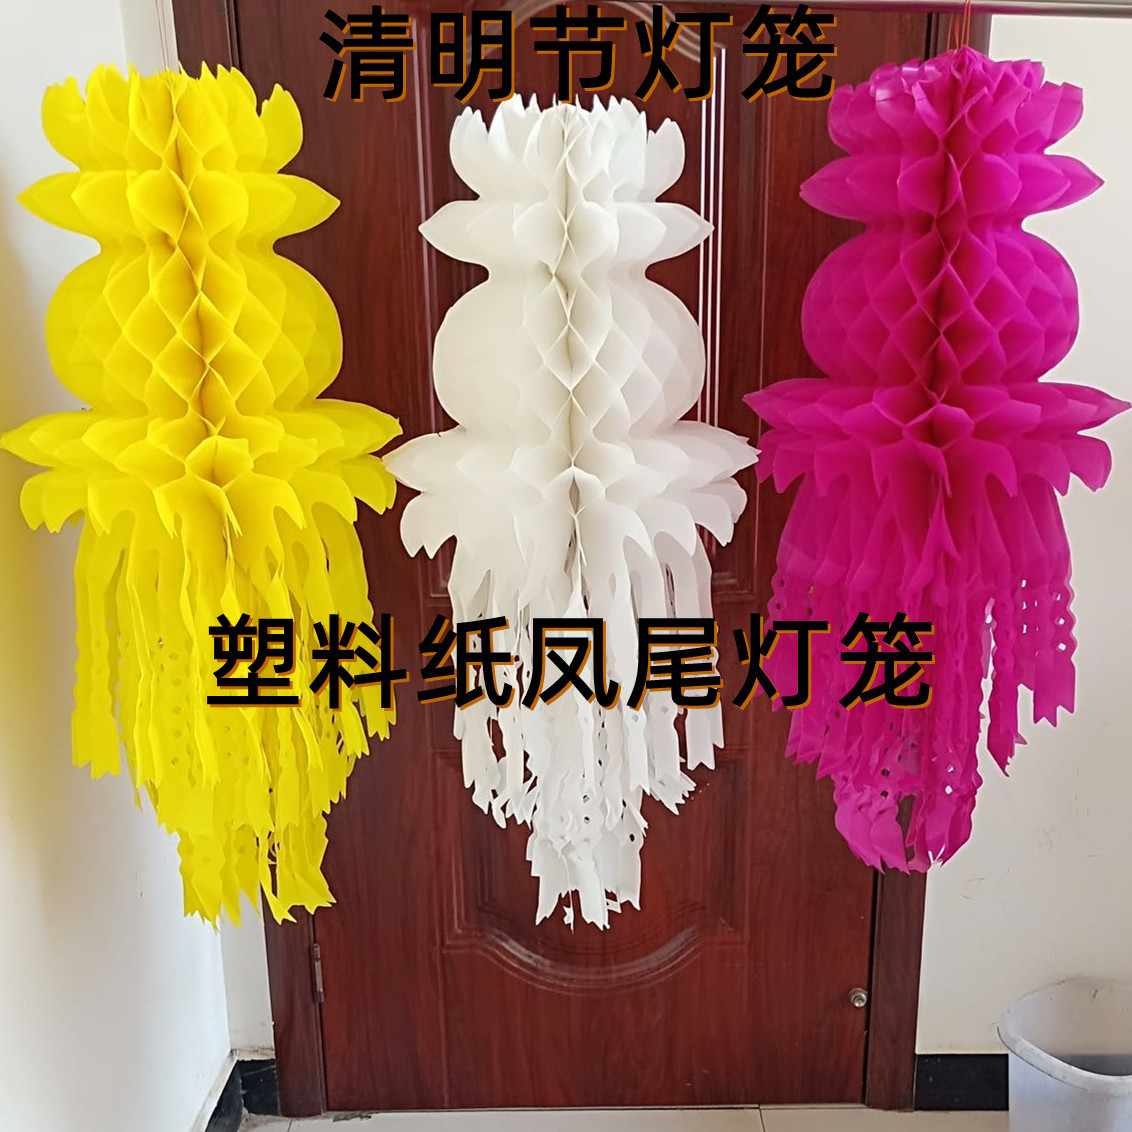 Qingming Festival Lantern Sacrifice Funeral Products Lantern Wholesale Upper Points Floating Lantern All Kinds of New White Lantern